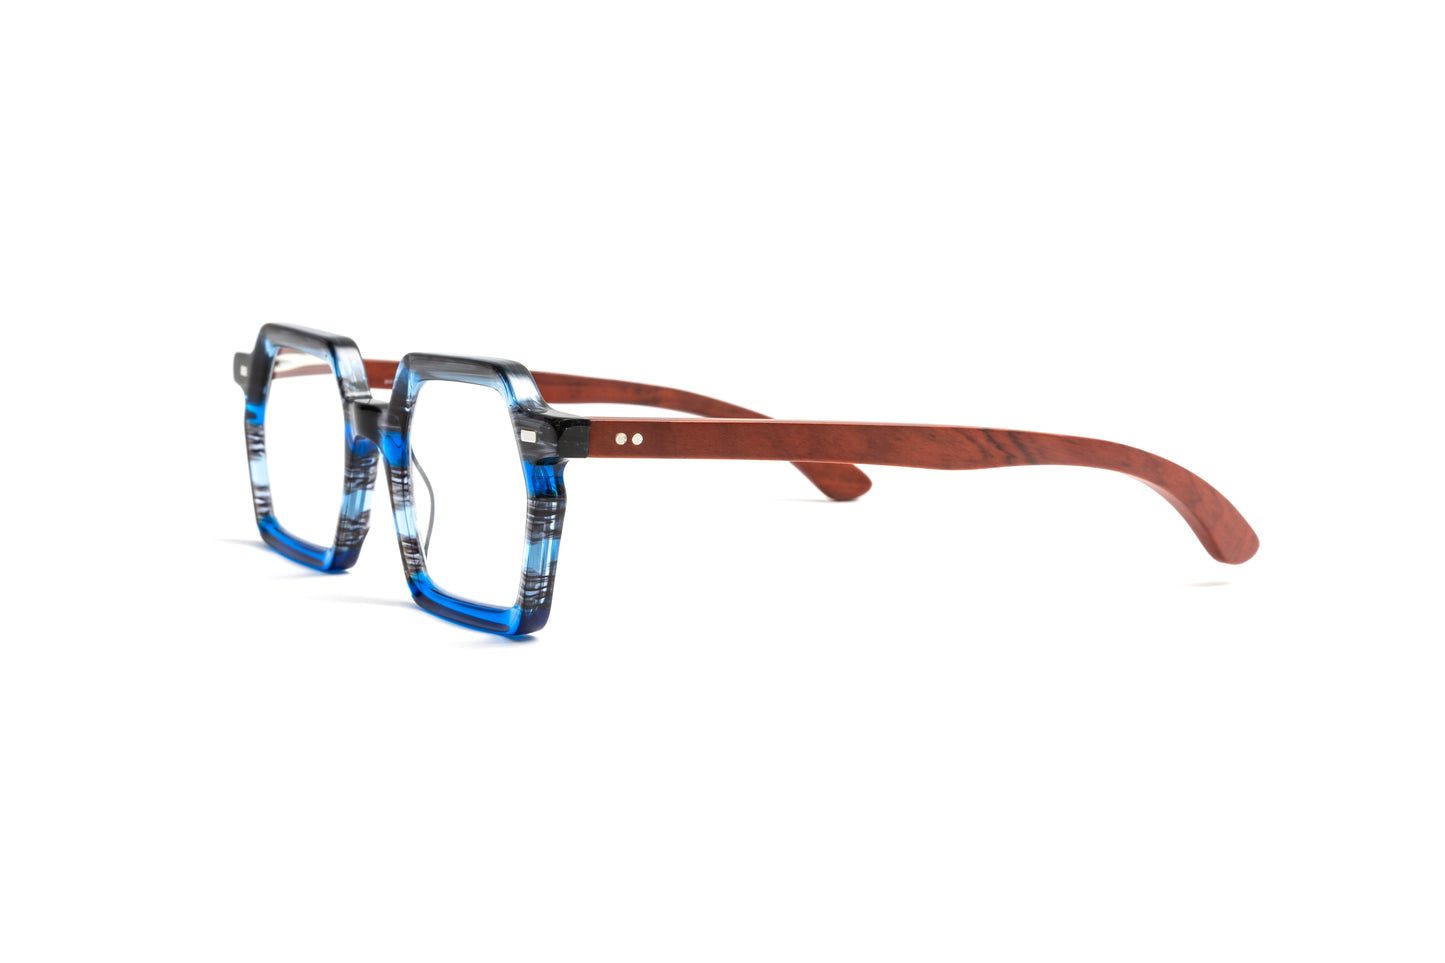 Tokyo square blue and black striped reading glasses with cherry wood temples for men and women by Eyejets